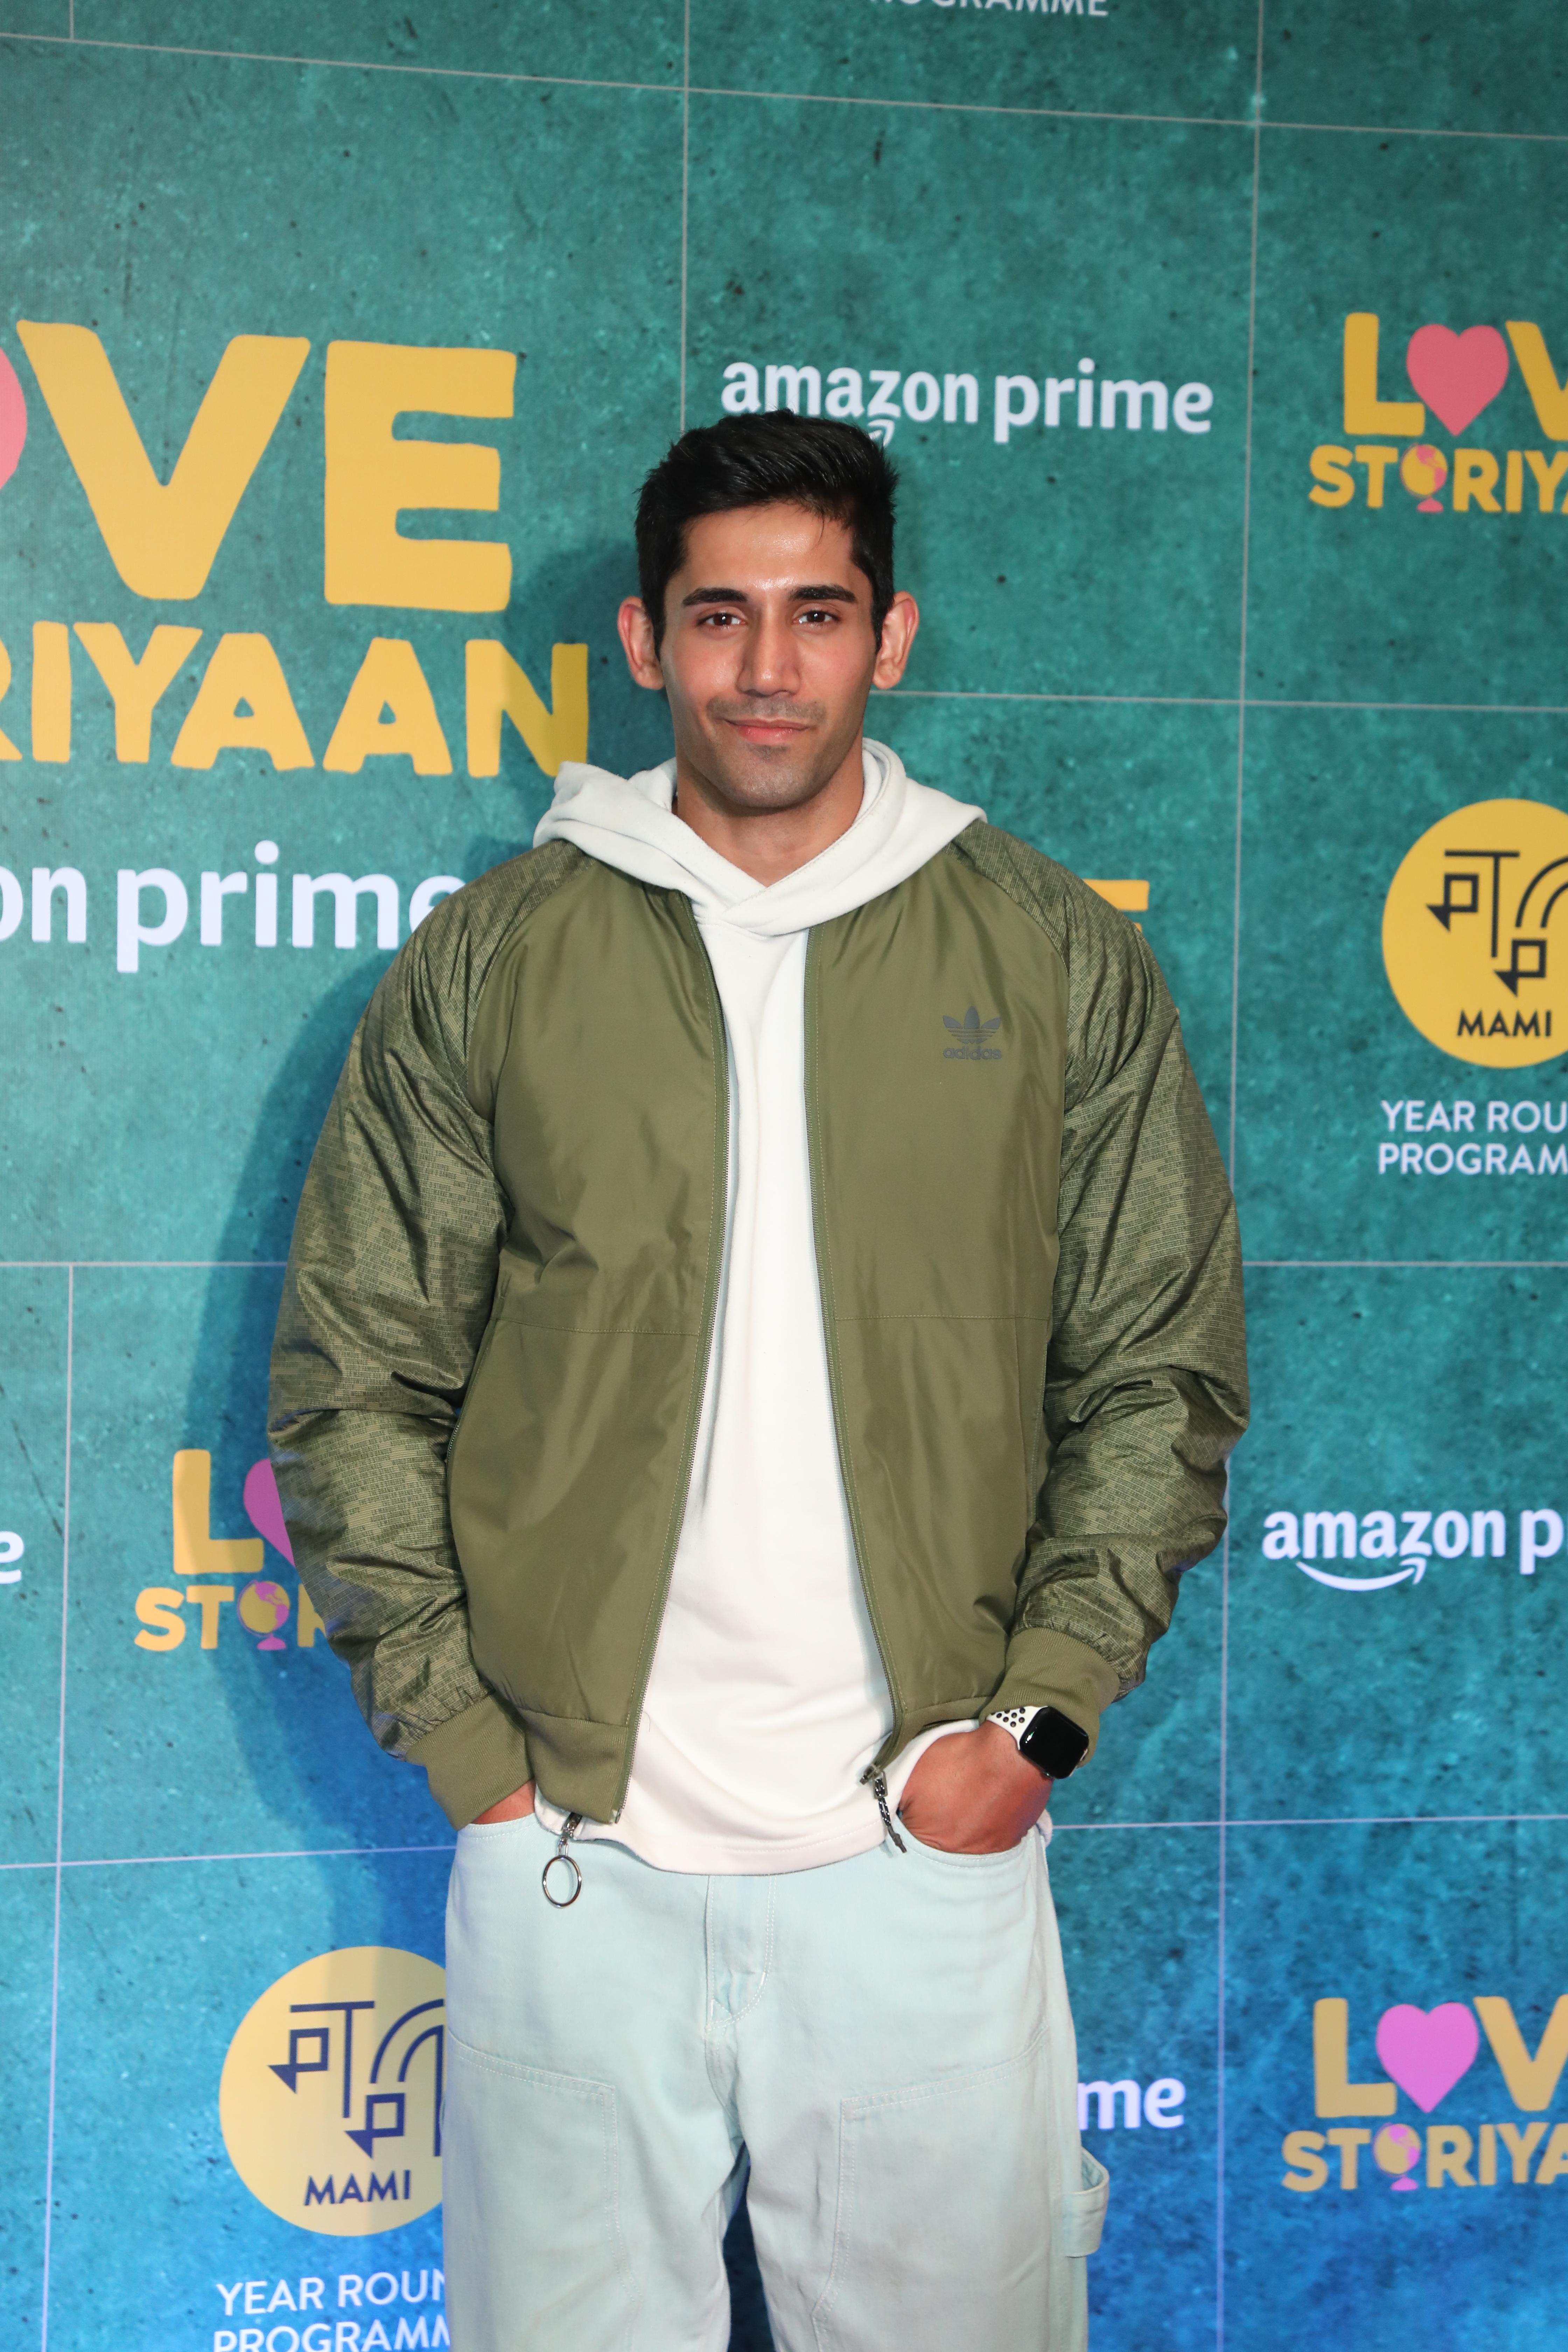 Actor Varun Sood, who has recently starred in the web series Karmma Calling, was also spotted at the premiere